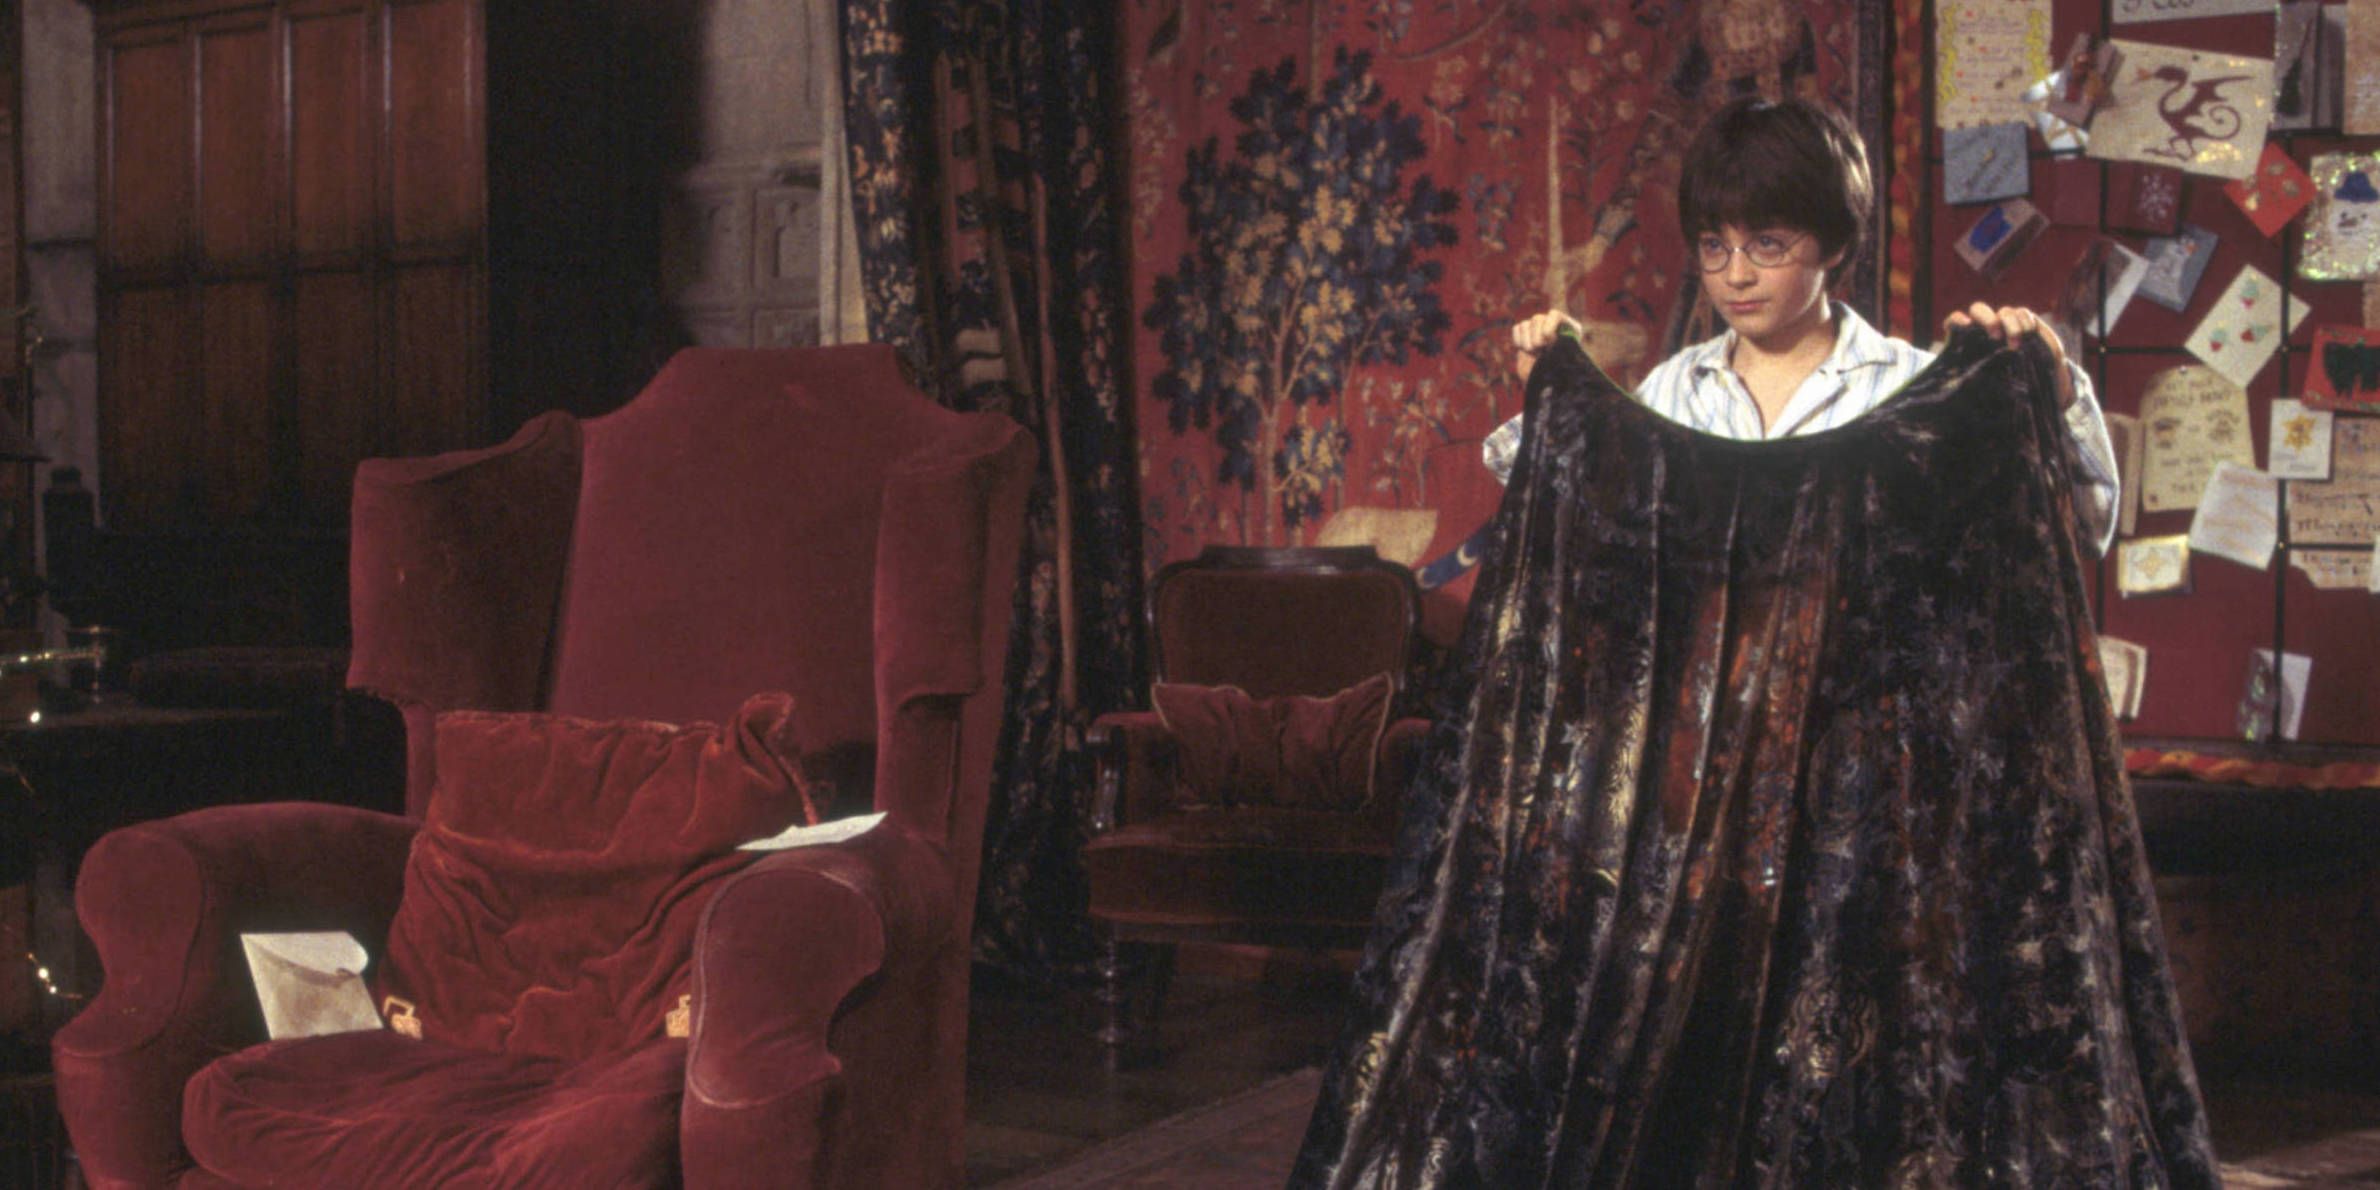 Actor Daniel Radcliffe as Harry Potter, putting on his invisibility cloak in Harry Potter and The Sorcerer's Stone